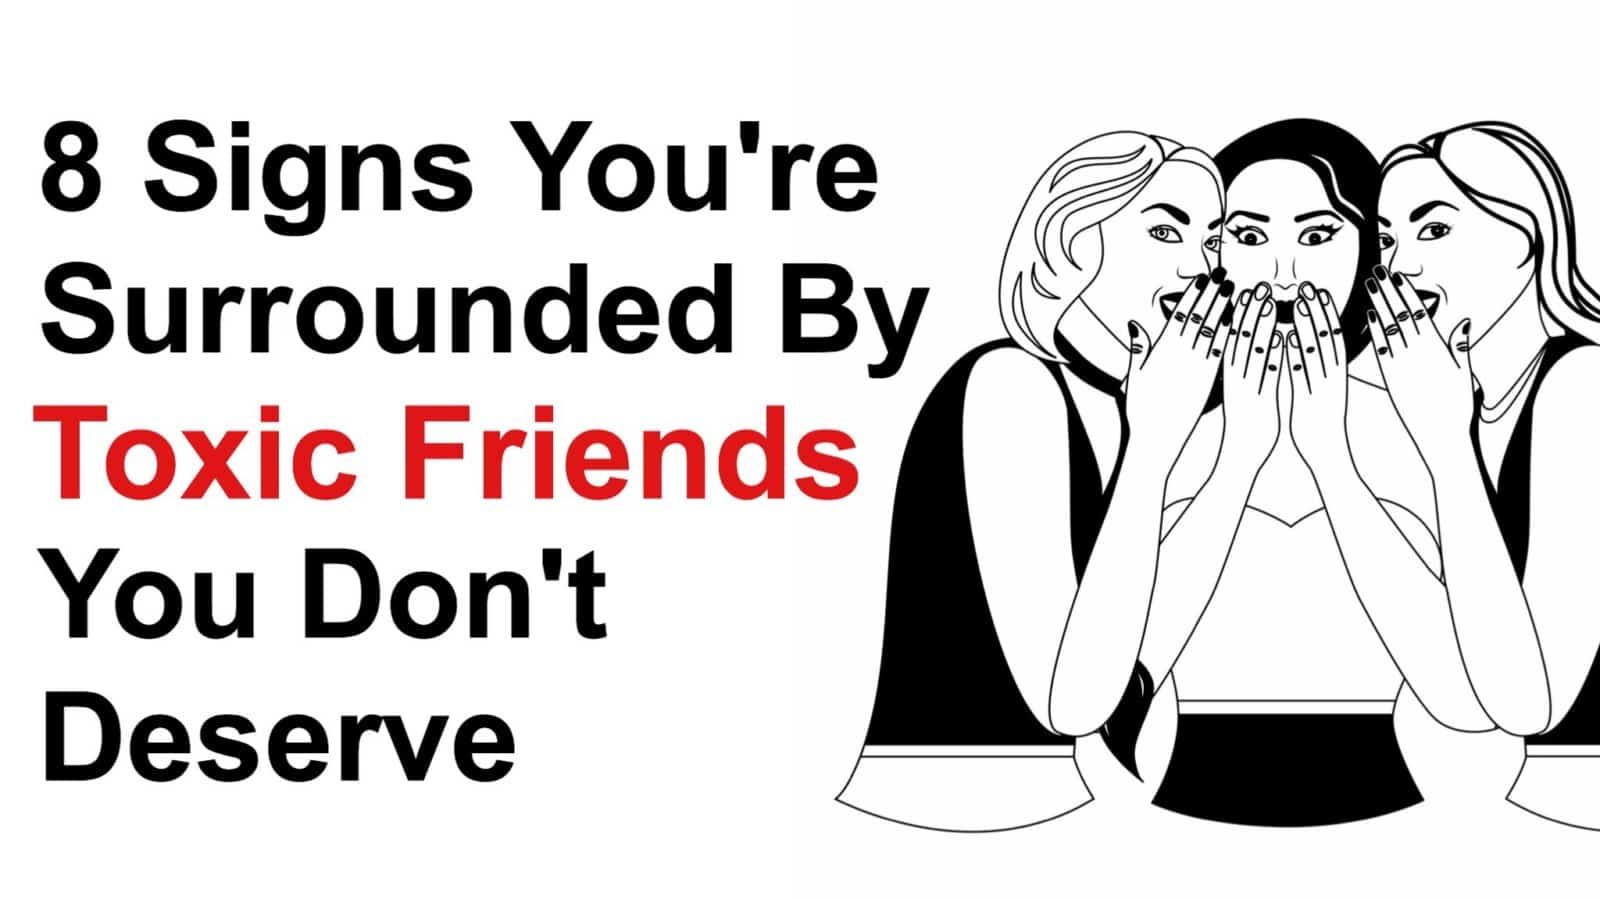 8 Signs You’re Surrounded By Toxic Friends You Don’t Deserve